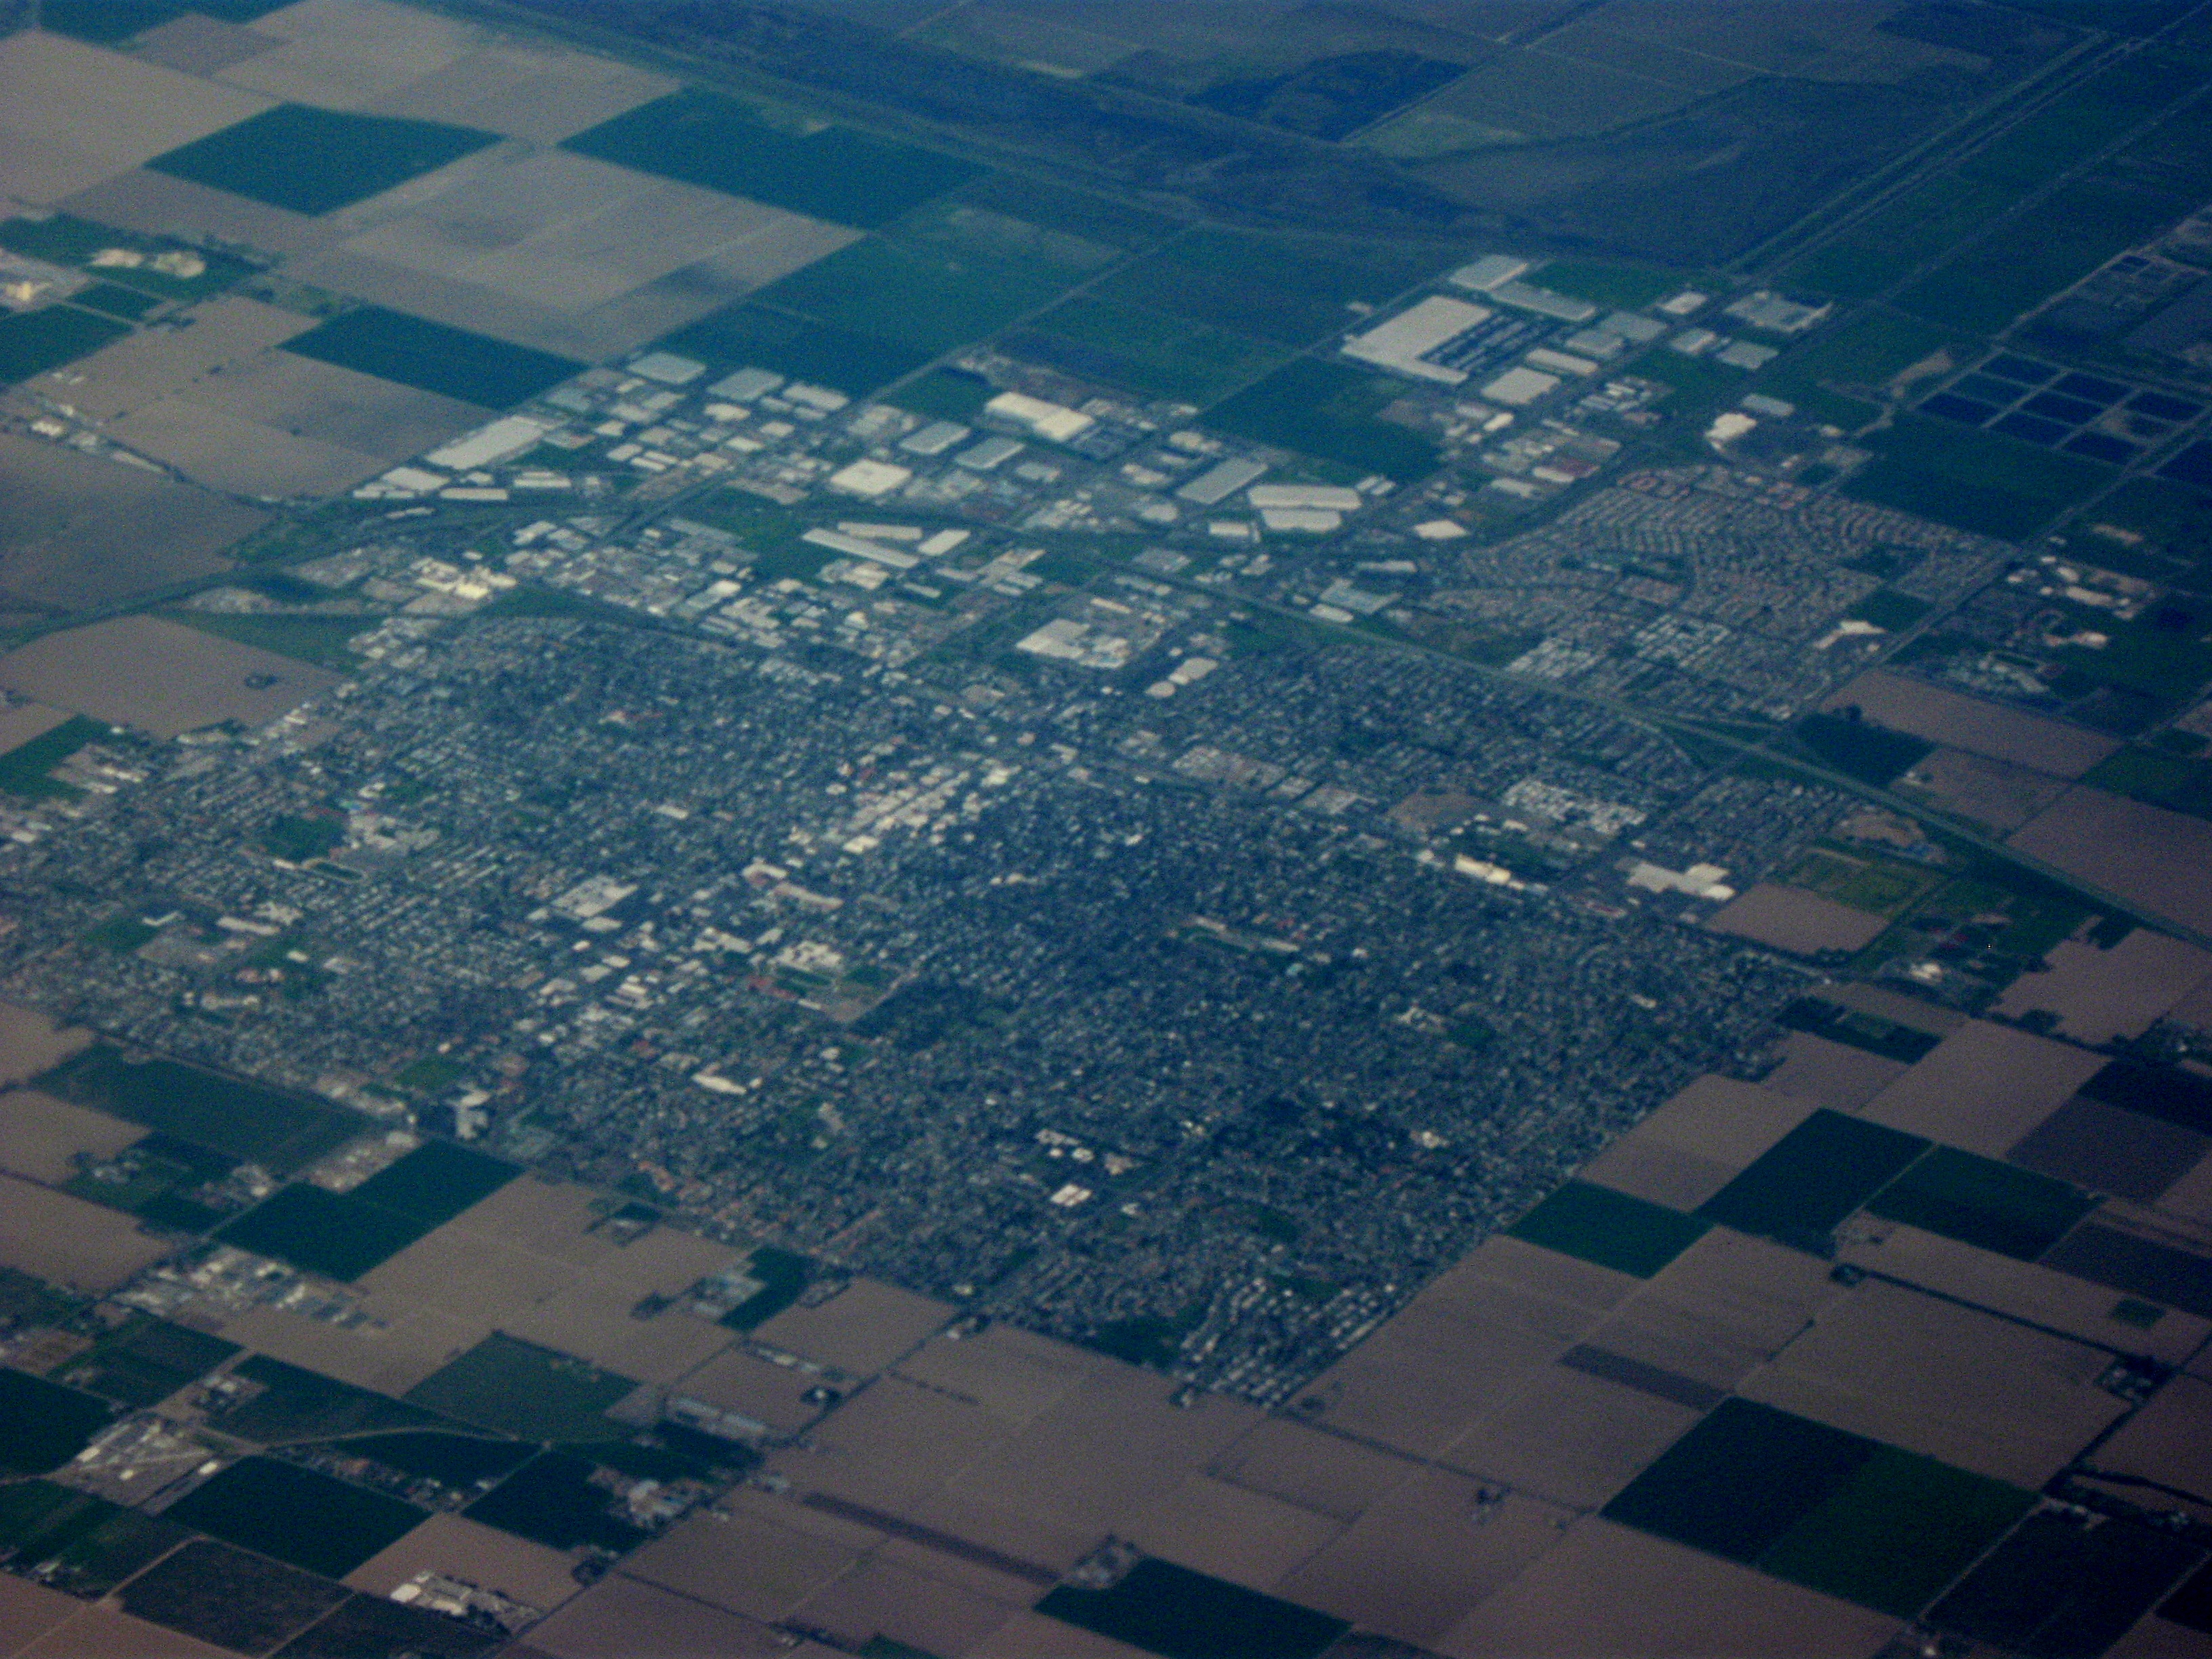 Aerial view of the city of Woodland, Calif.